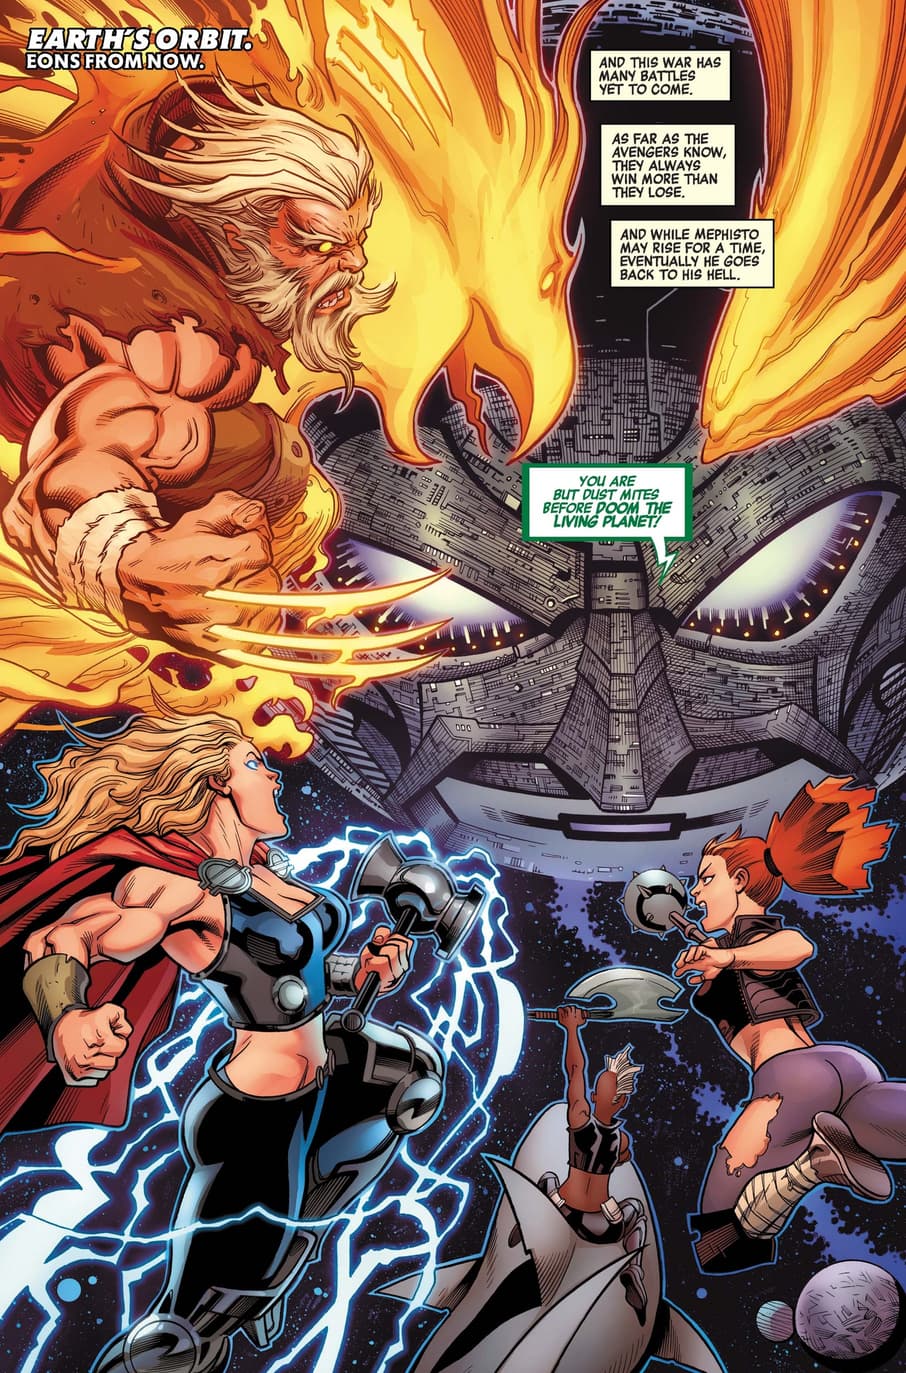 The ancient Phoenix Force in AVENGERS #38.